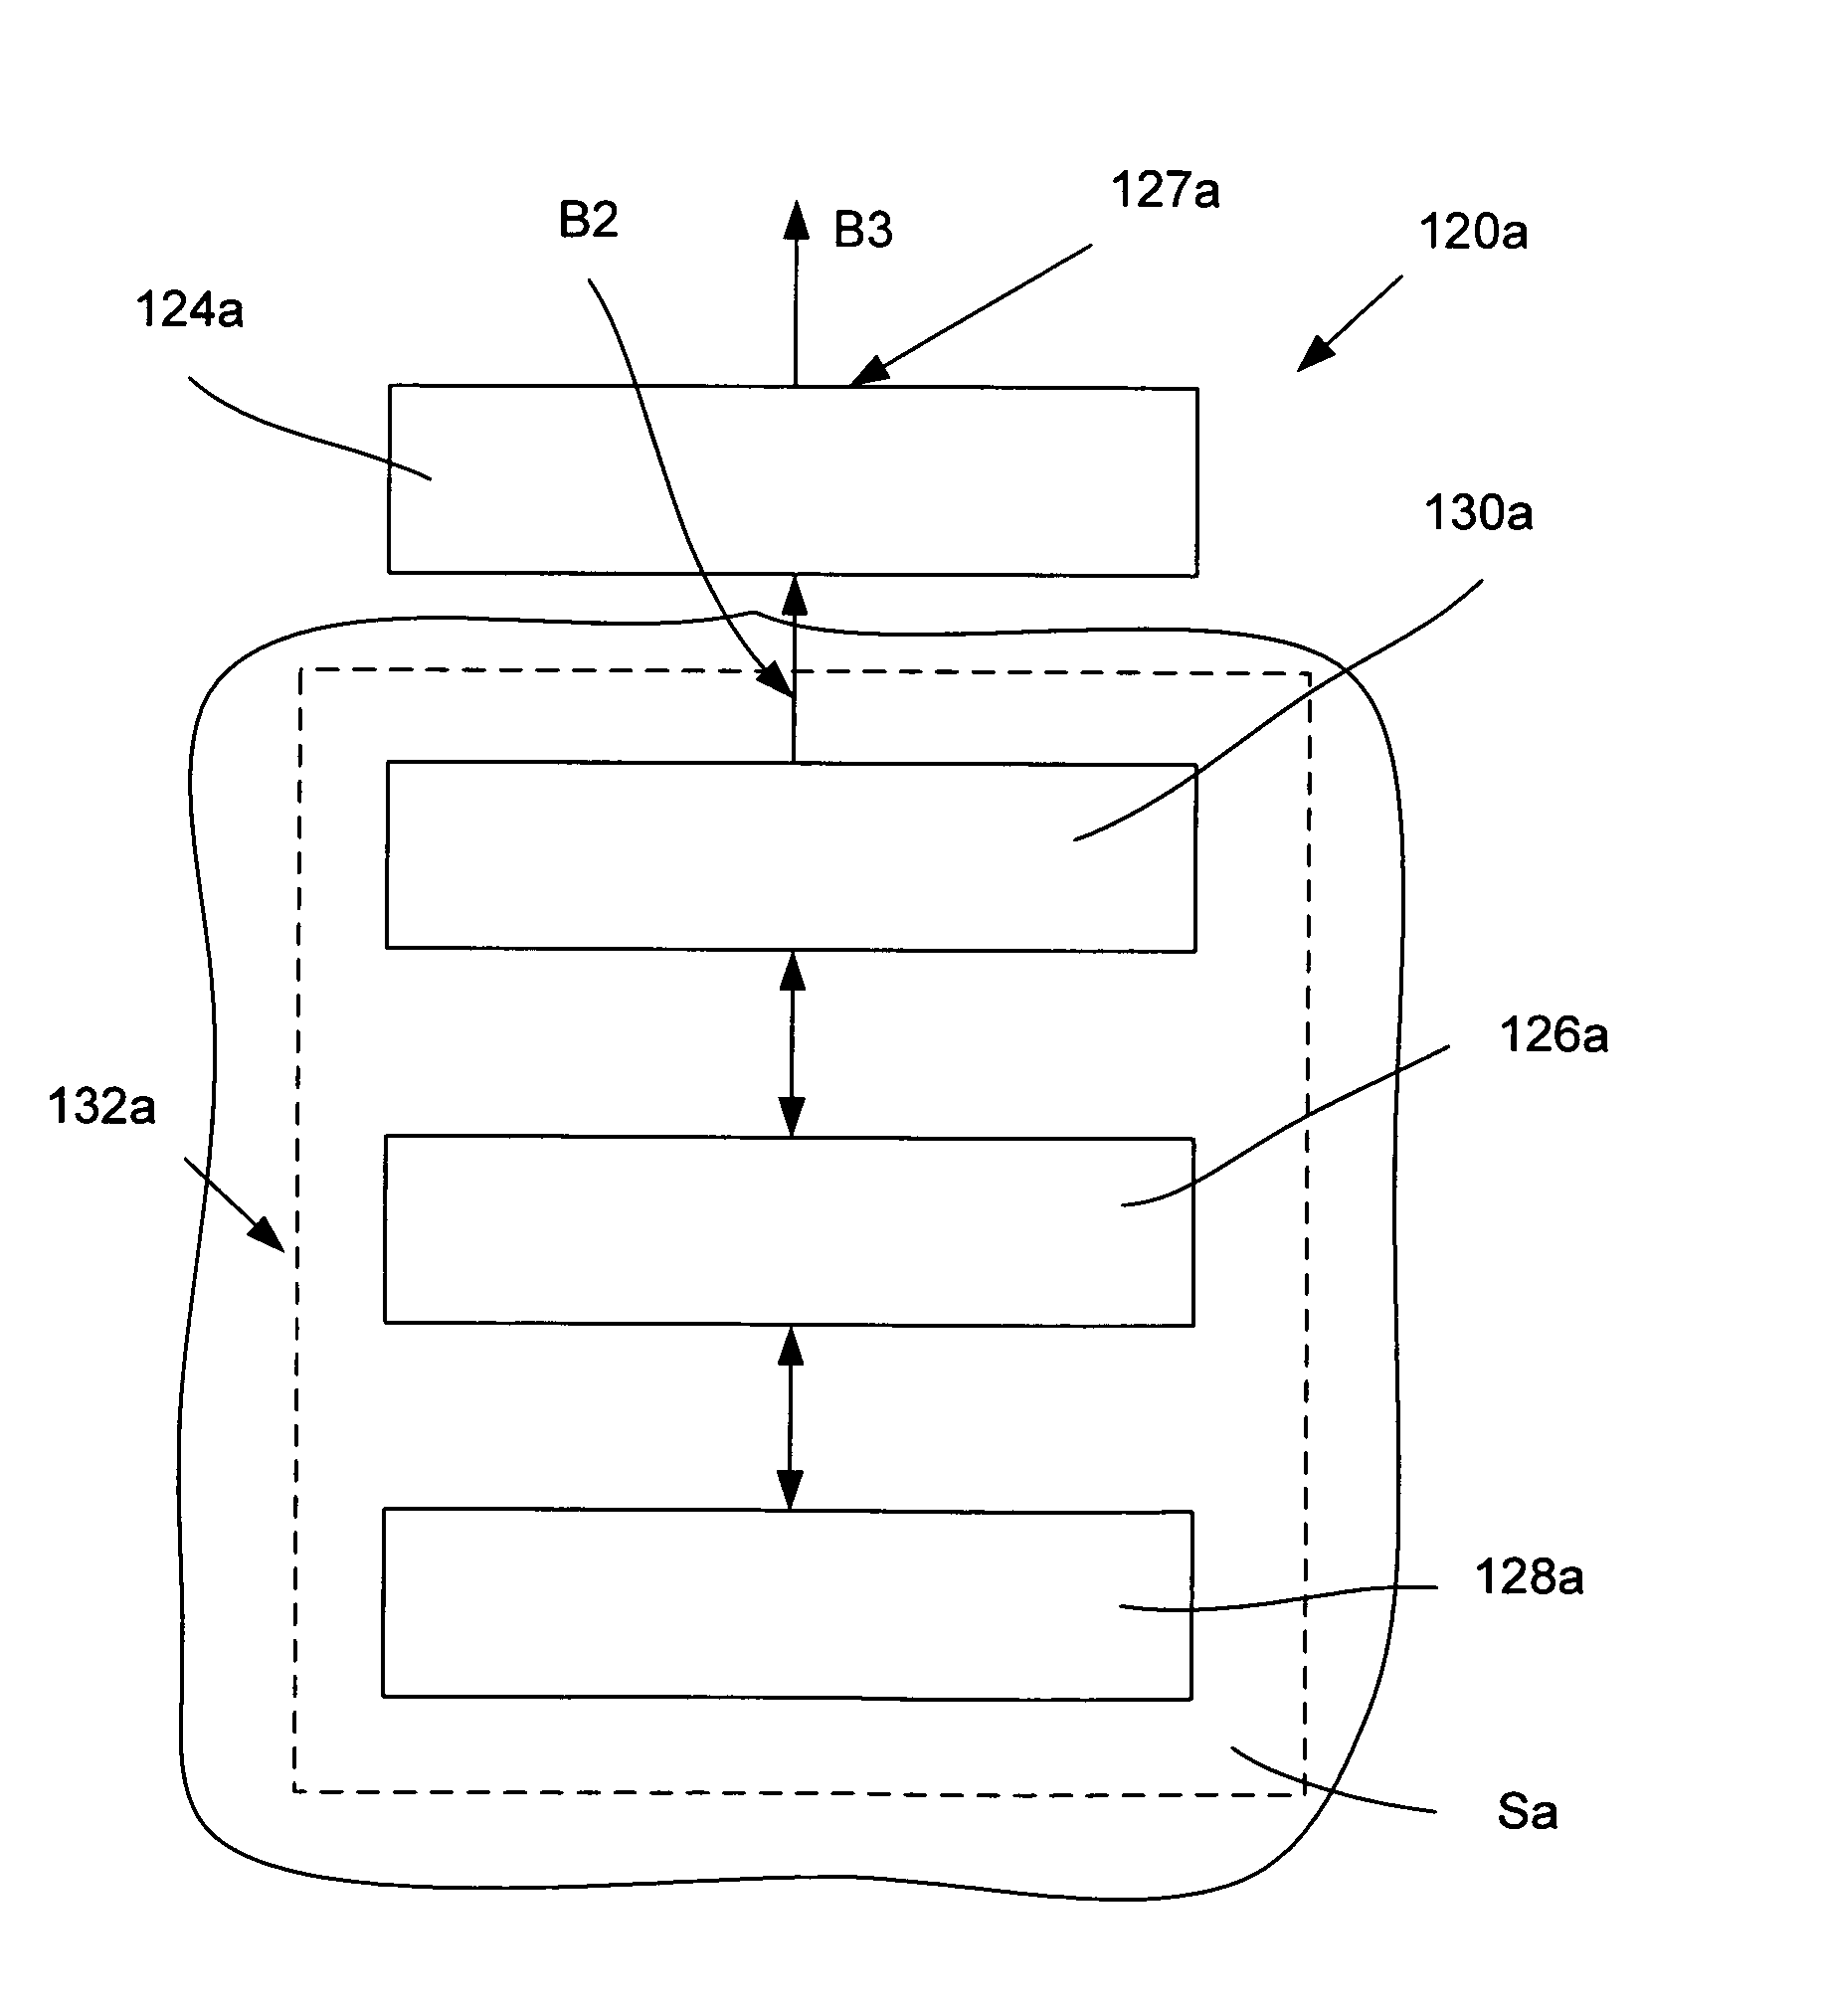 Light-enhancing device and method based on use of an optically active lasing medium in combination with digital planar holography